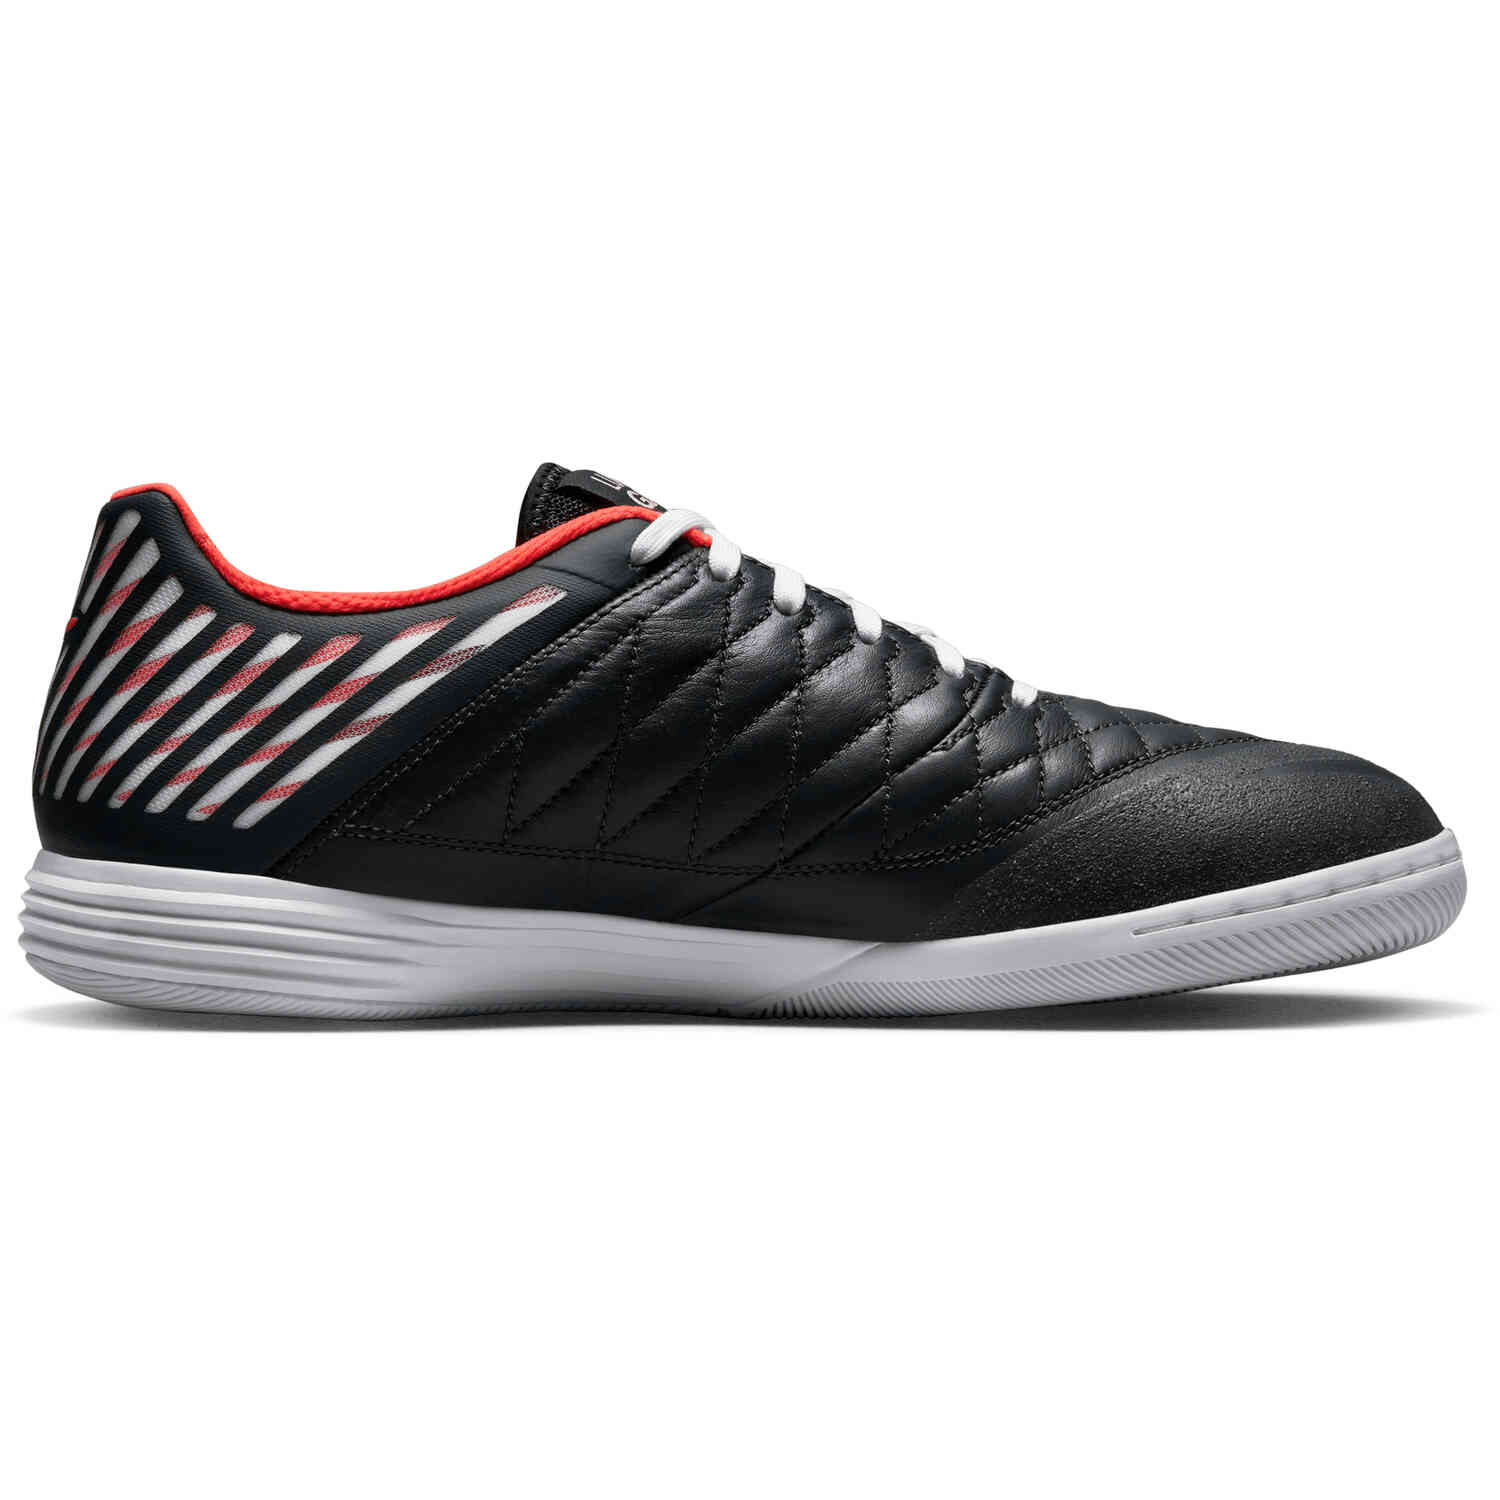 Nike Lunargato II IC – Anthracite & Infrared 23 with White with Team Gold